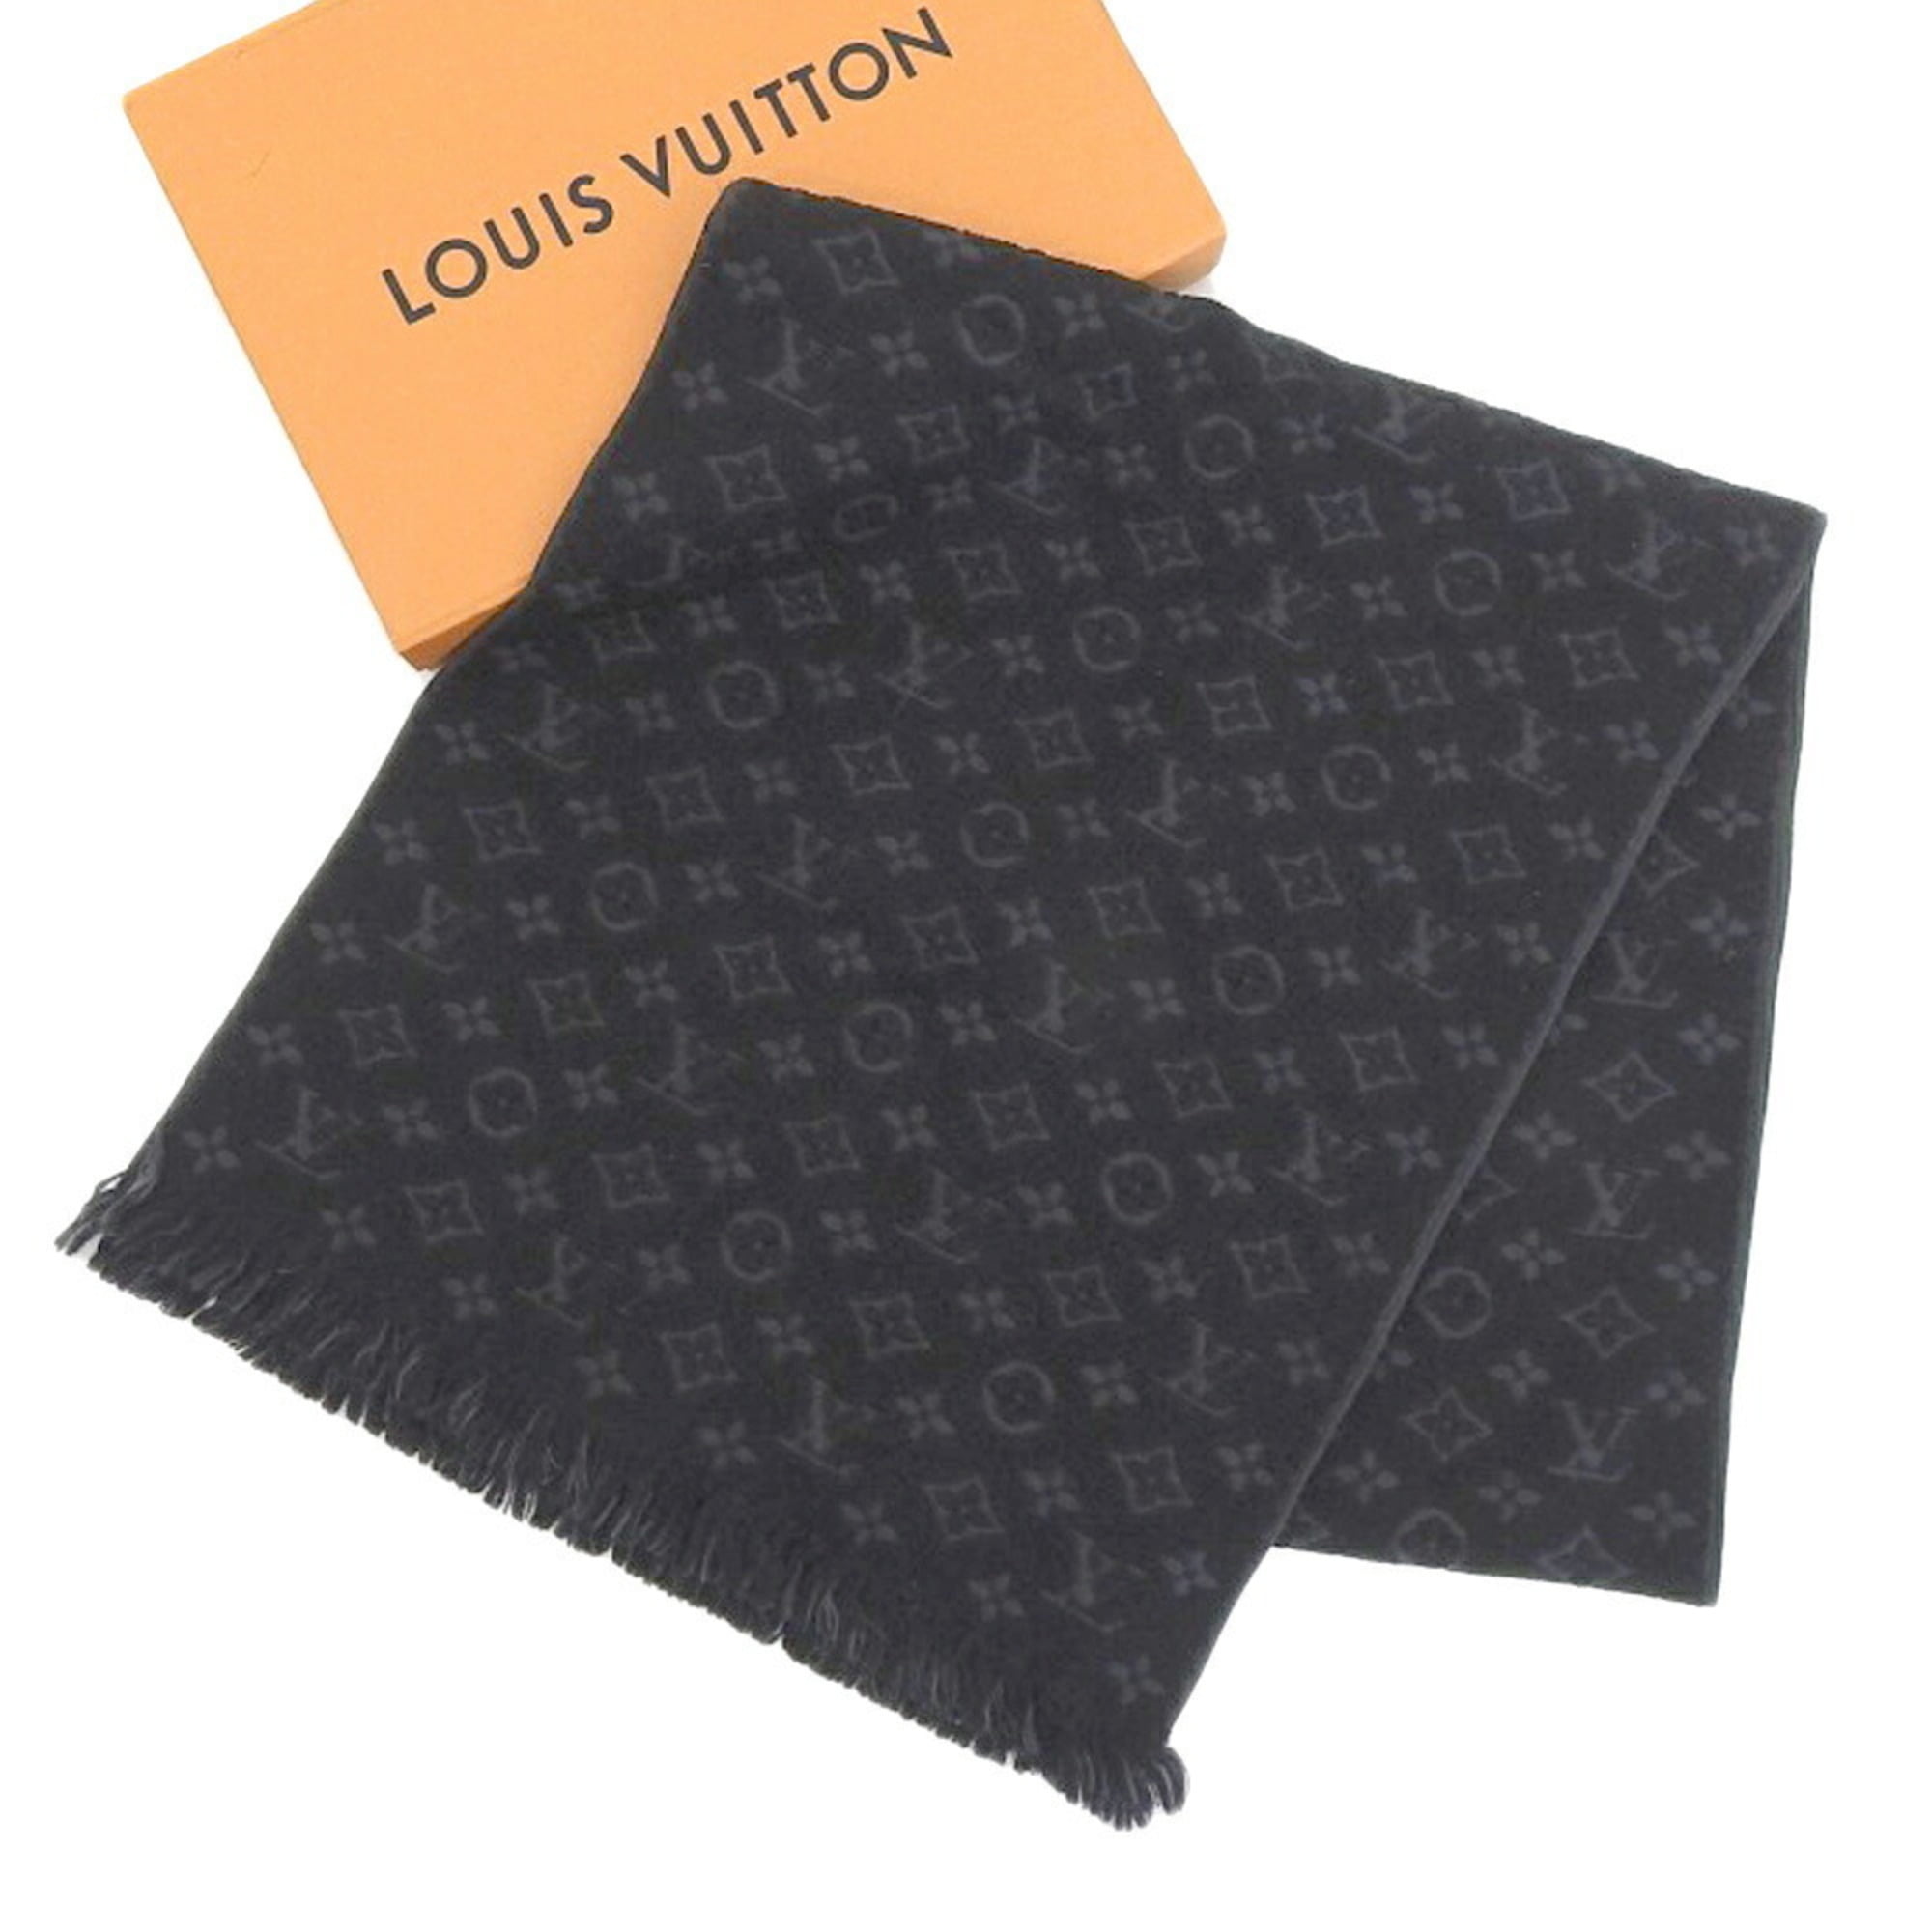 Buy LOUIS VUITTON Escharp LV City M70255 muffler navy red / 048561 [used]  from Japan - Buy authentic Plus exclusive items from Japan